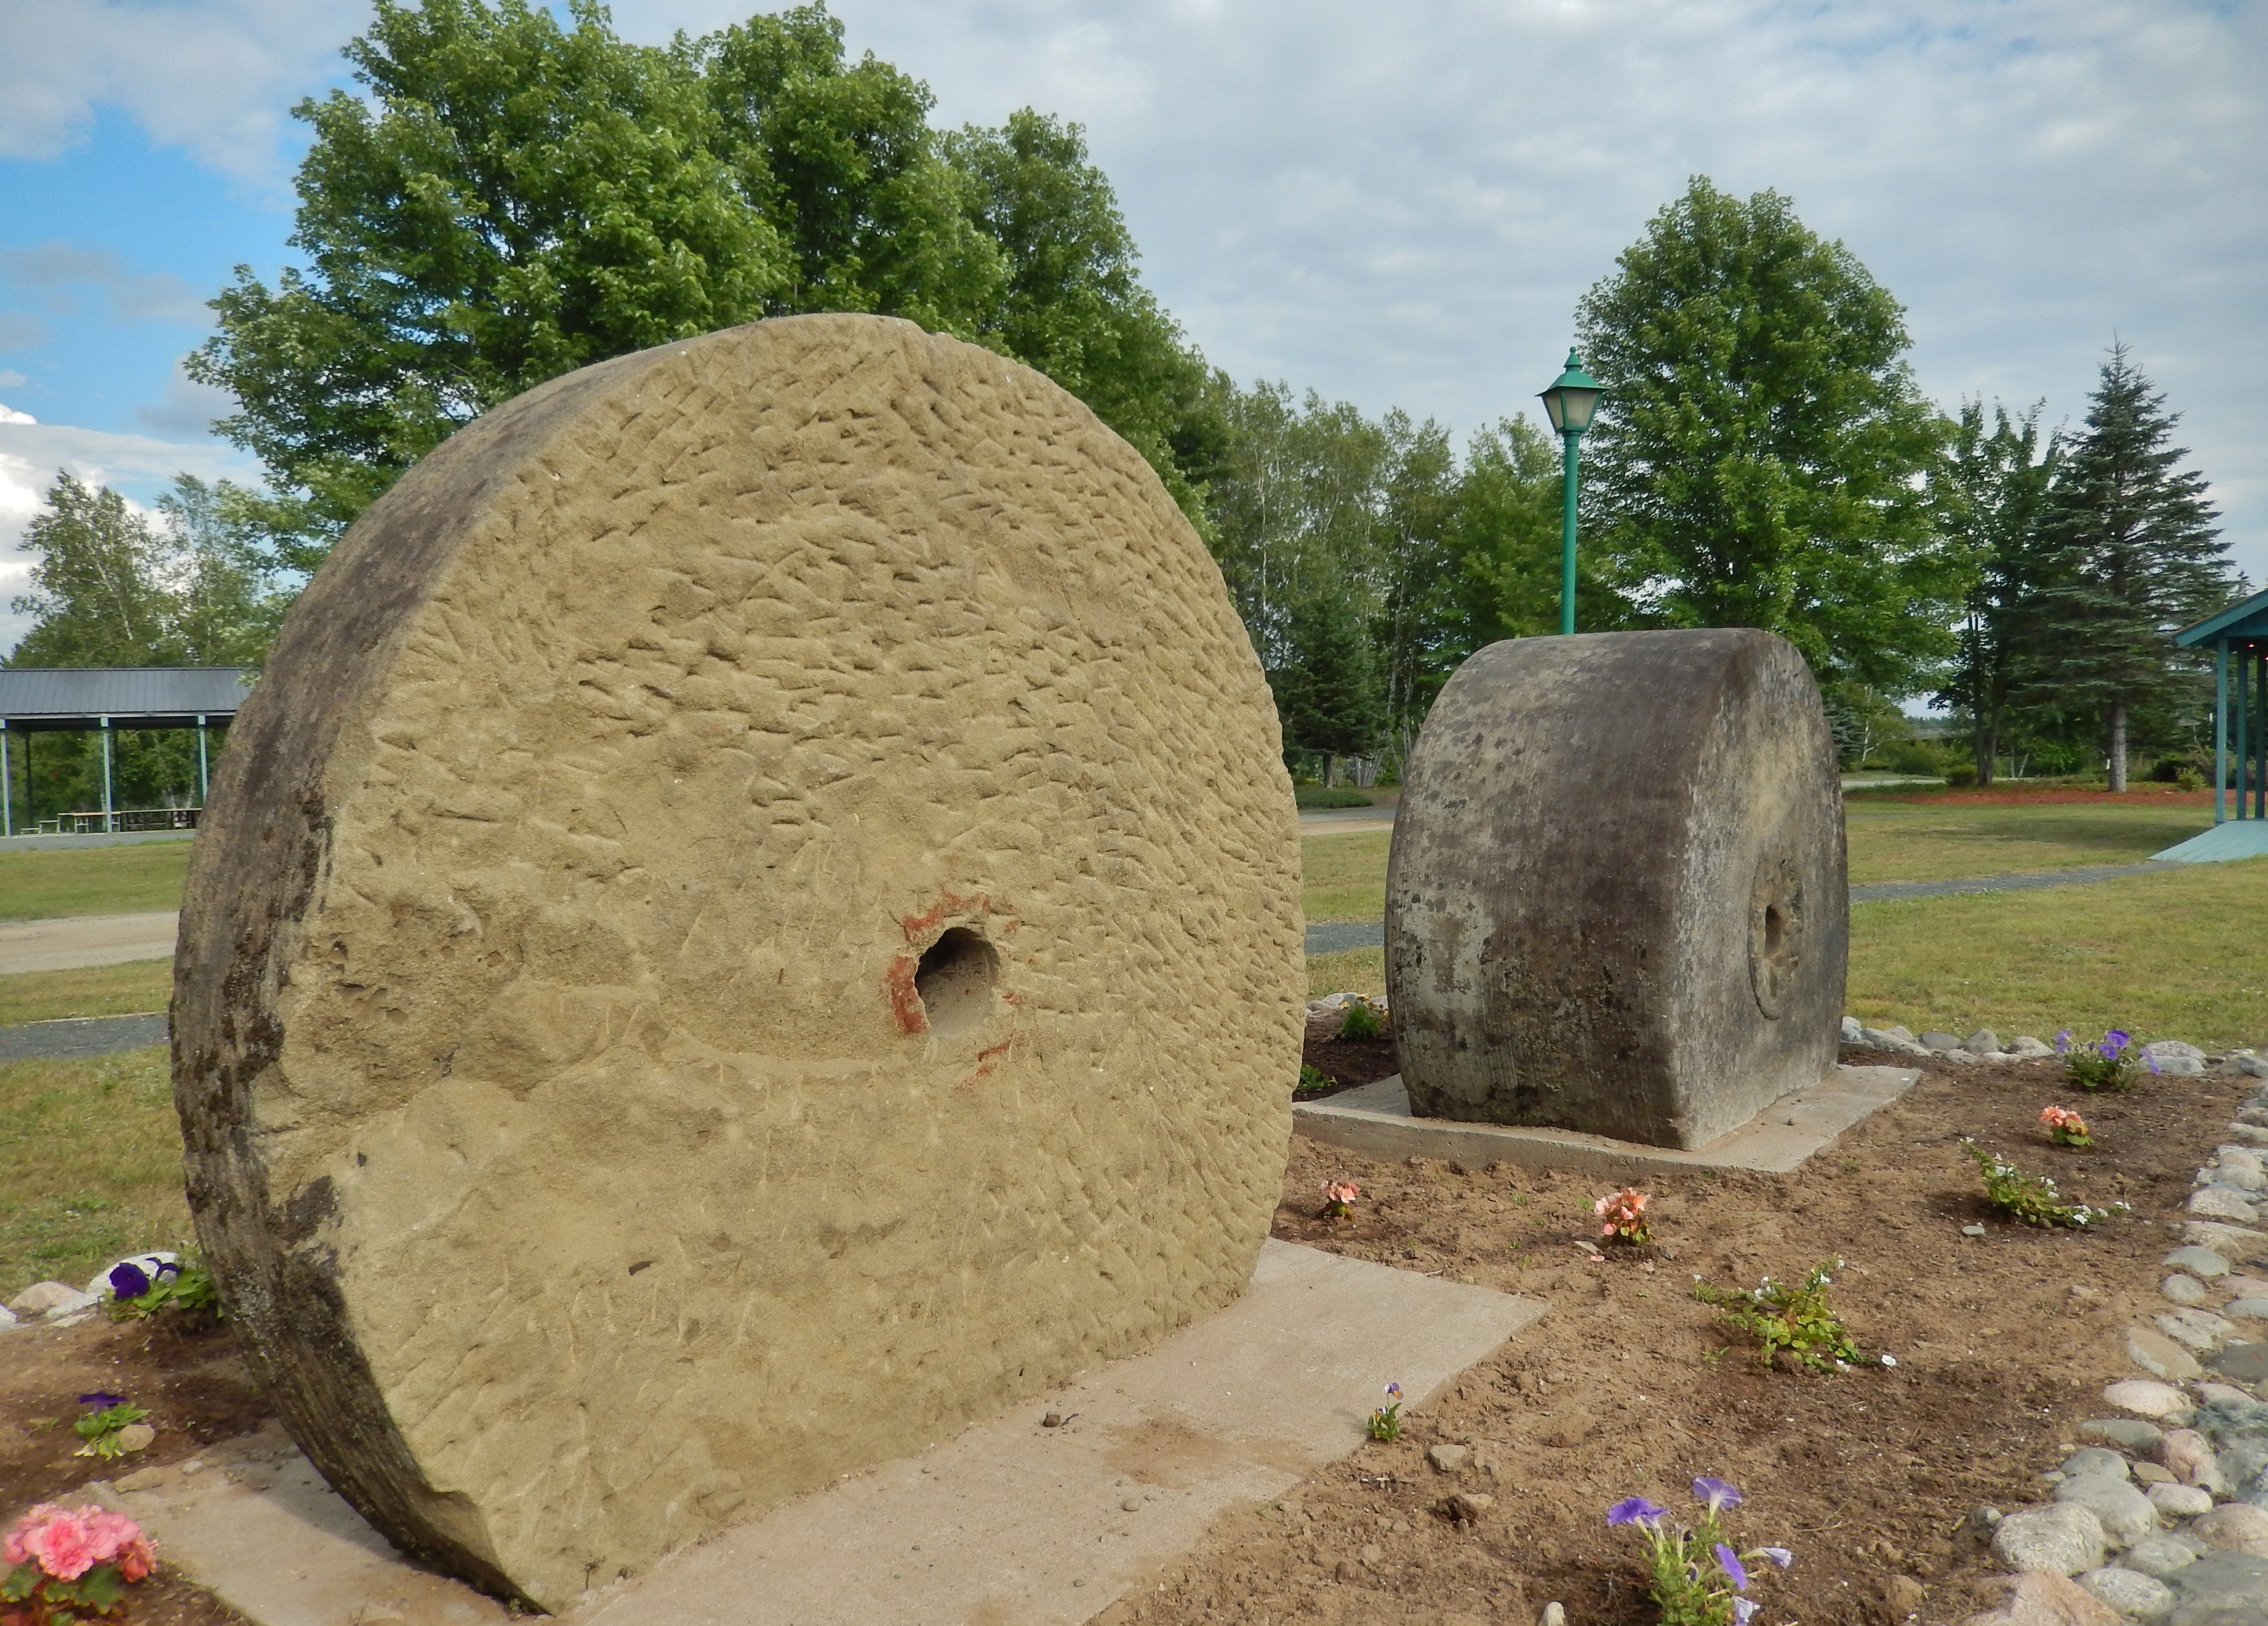 Millstones (<i>side view showing scoring and relative width</i>)